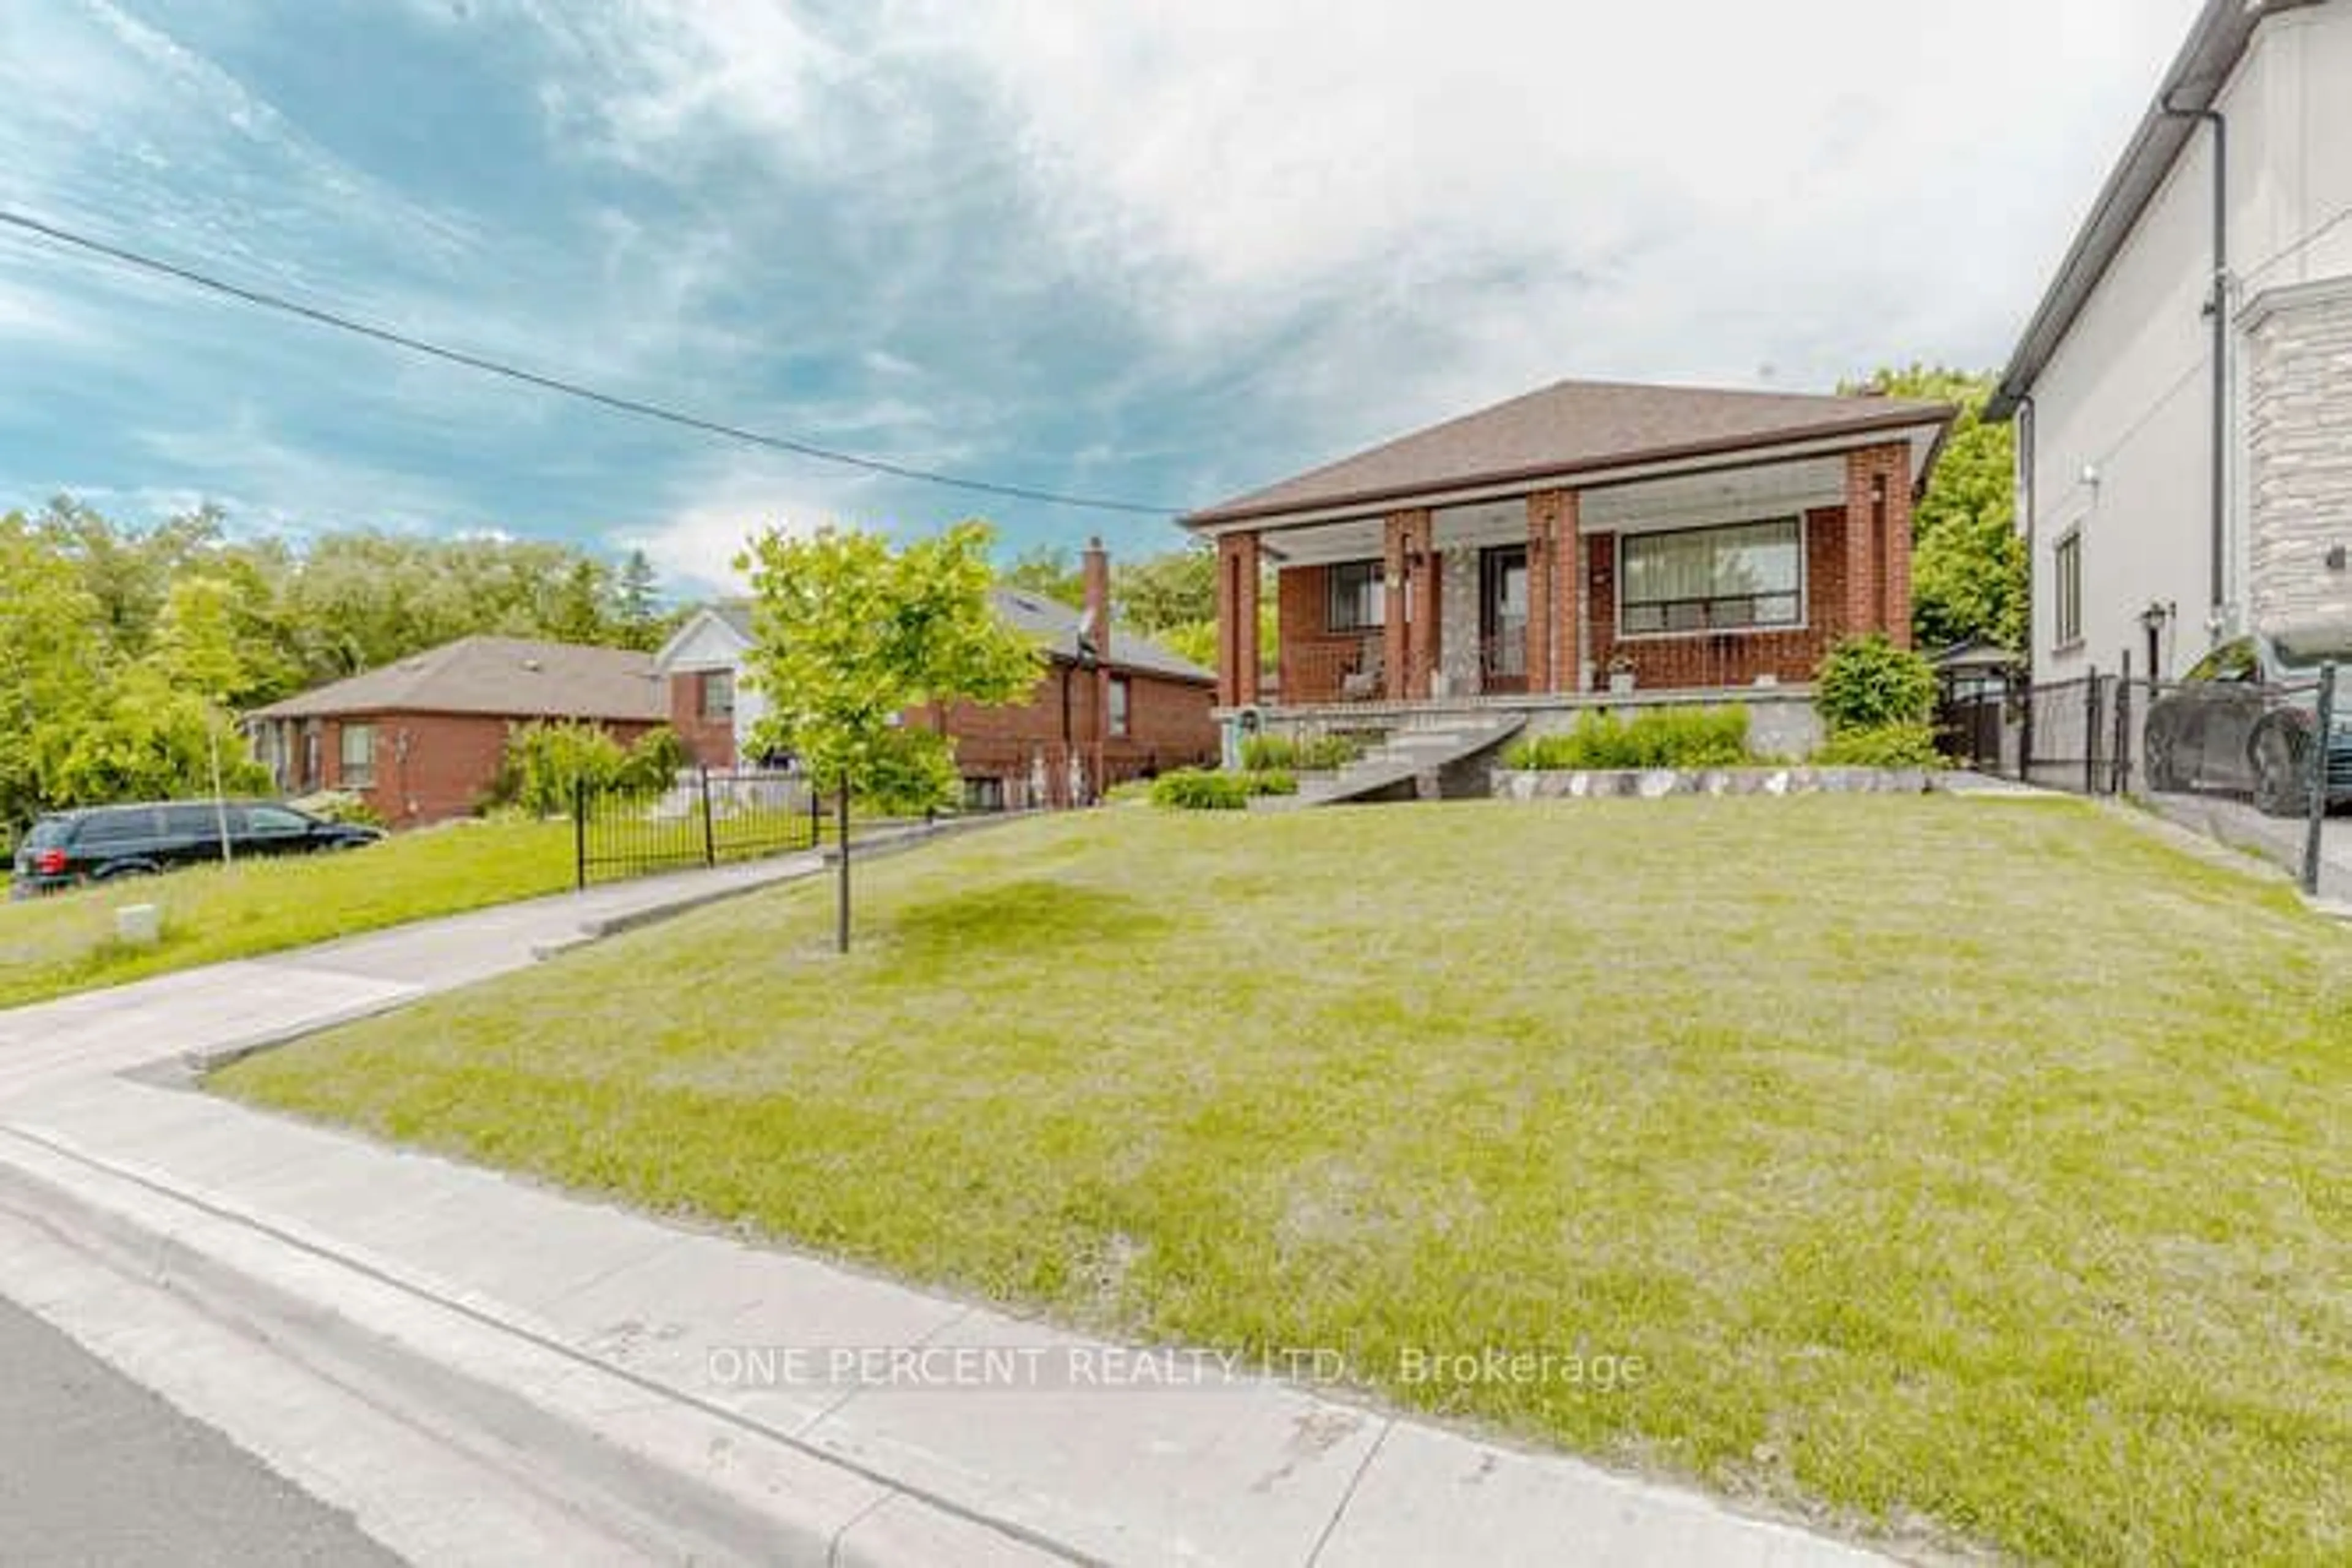 Frontside or backside of a home for 70 Forthbridge Cres, Toronto Ontario M3M 2A3